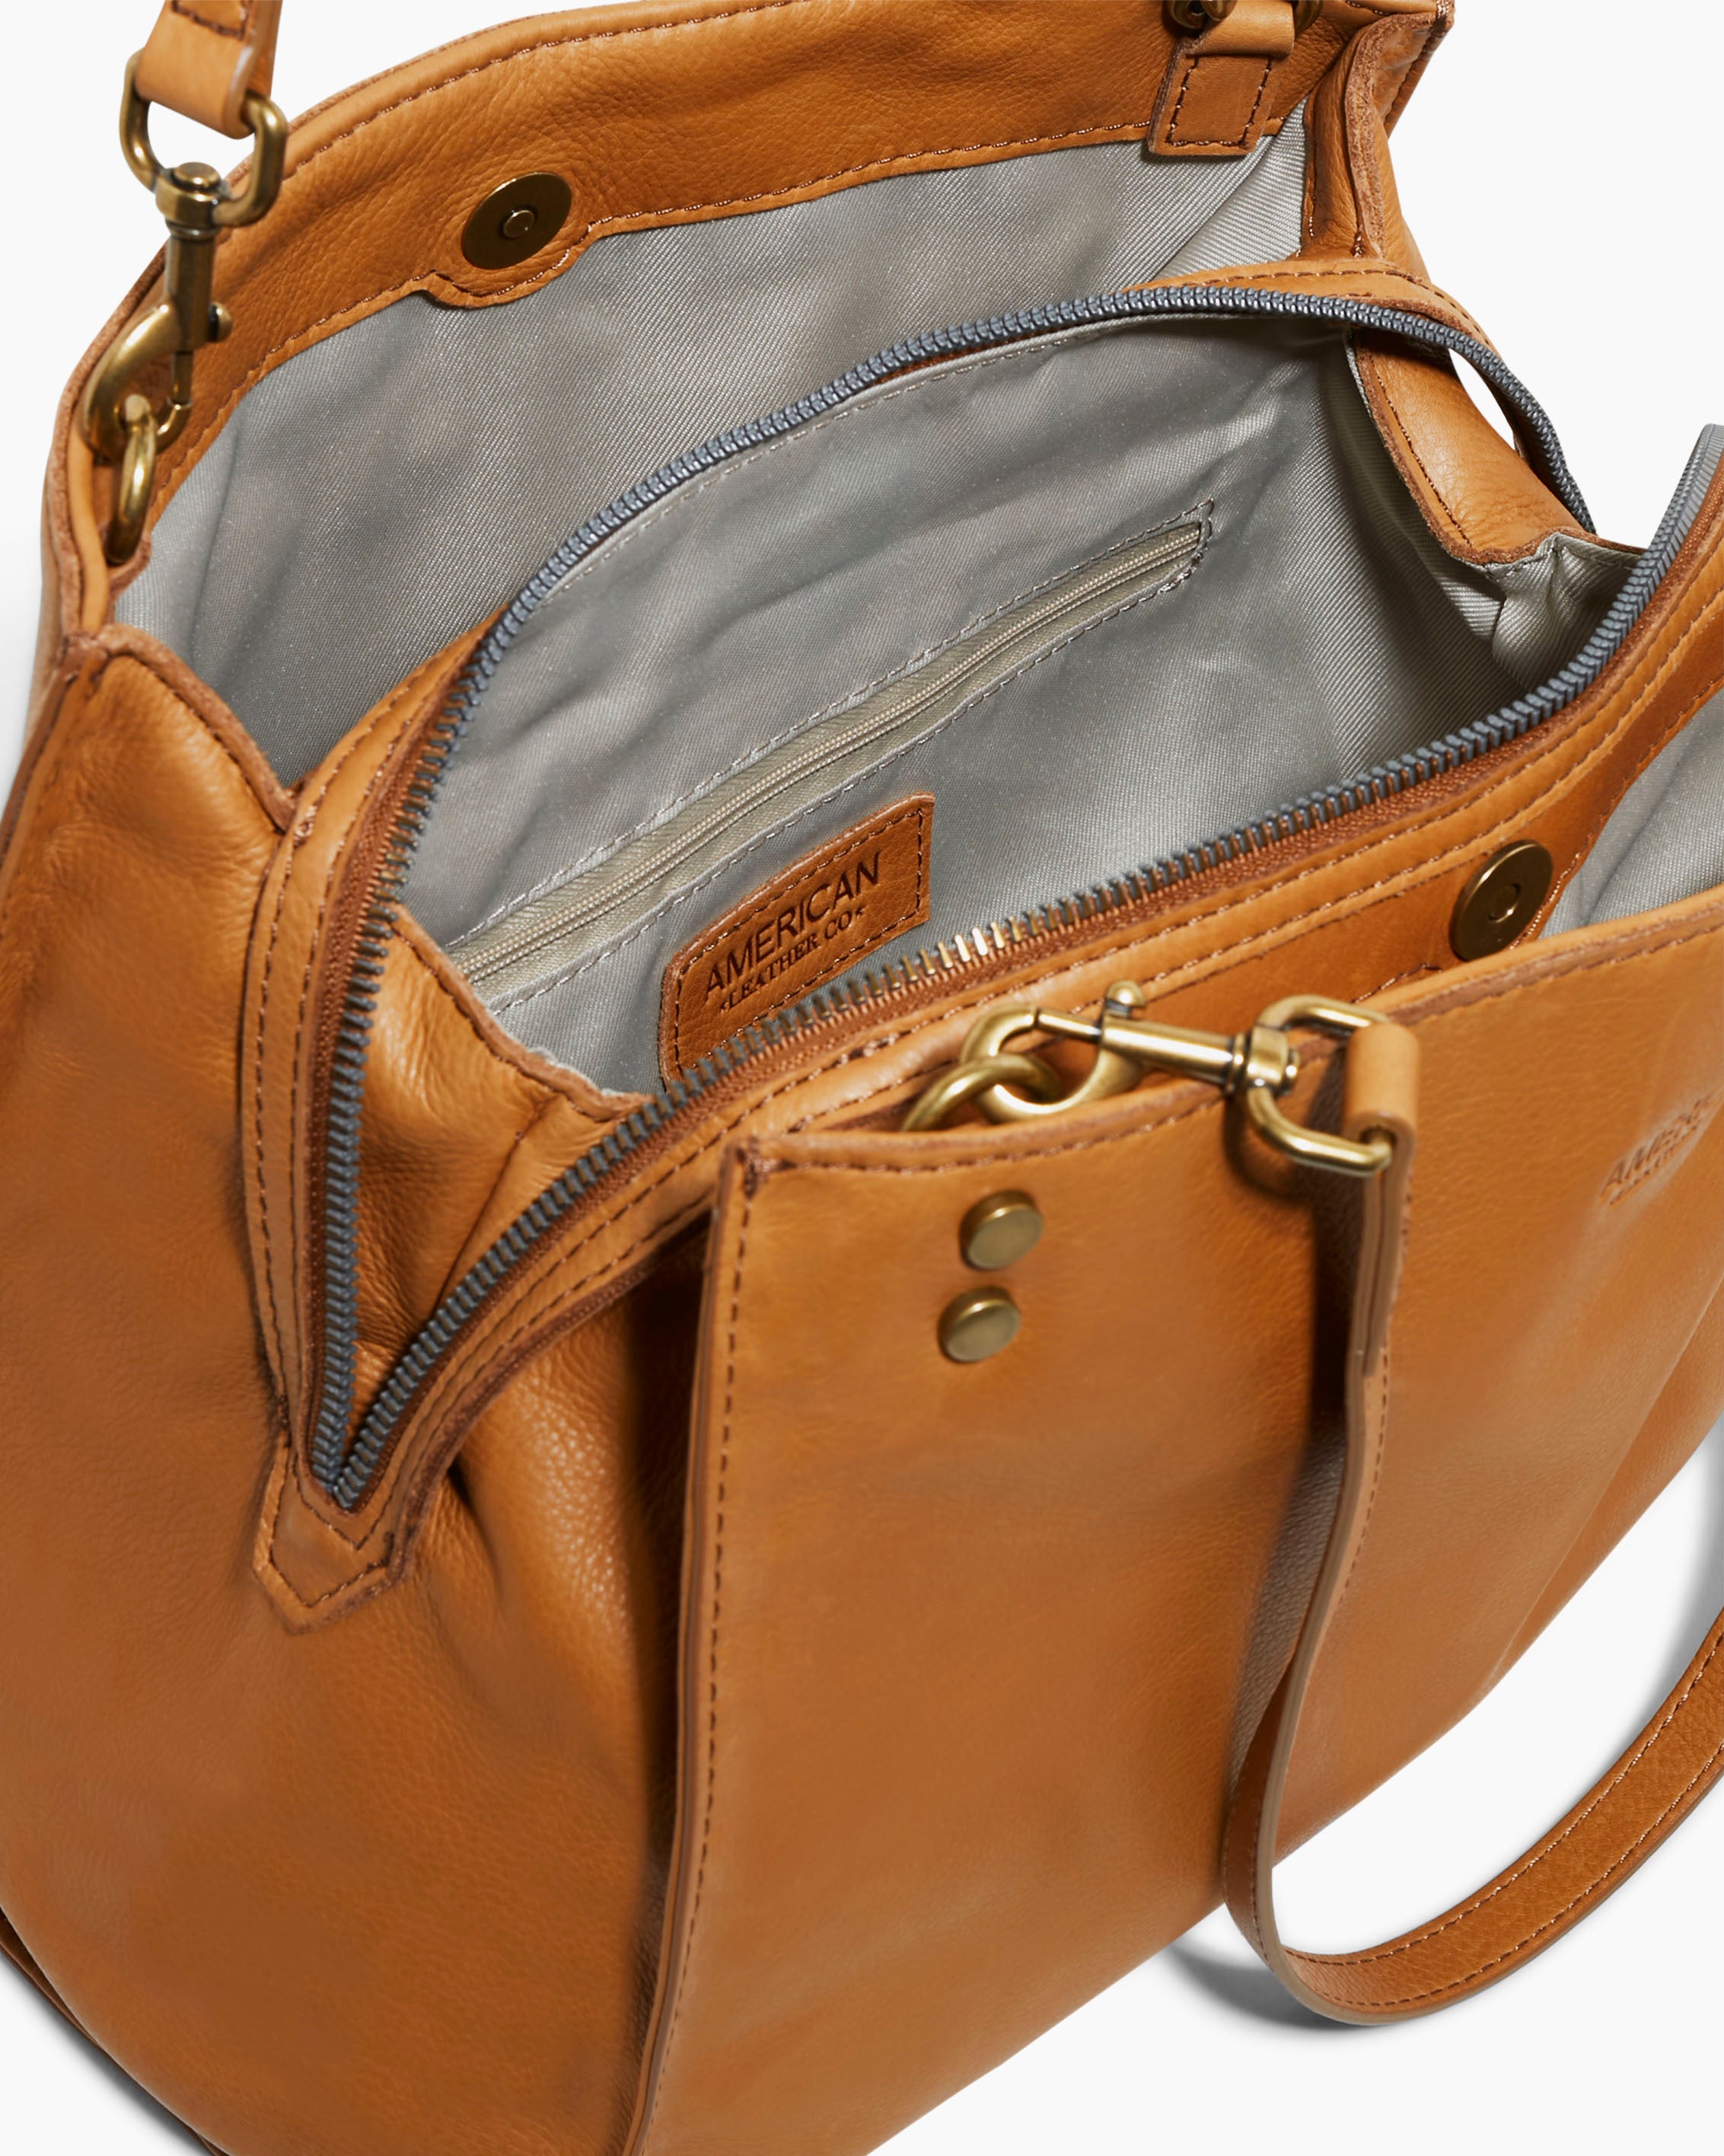 Bag Swap Time: From LOUIS VUITTON to AMERICAN LEATHER CO LENOX